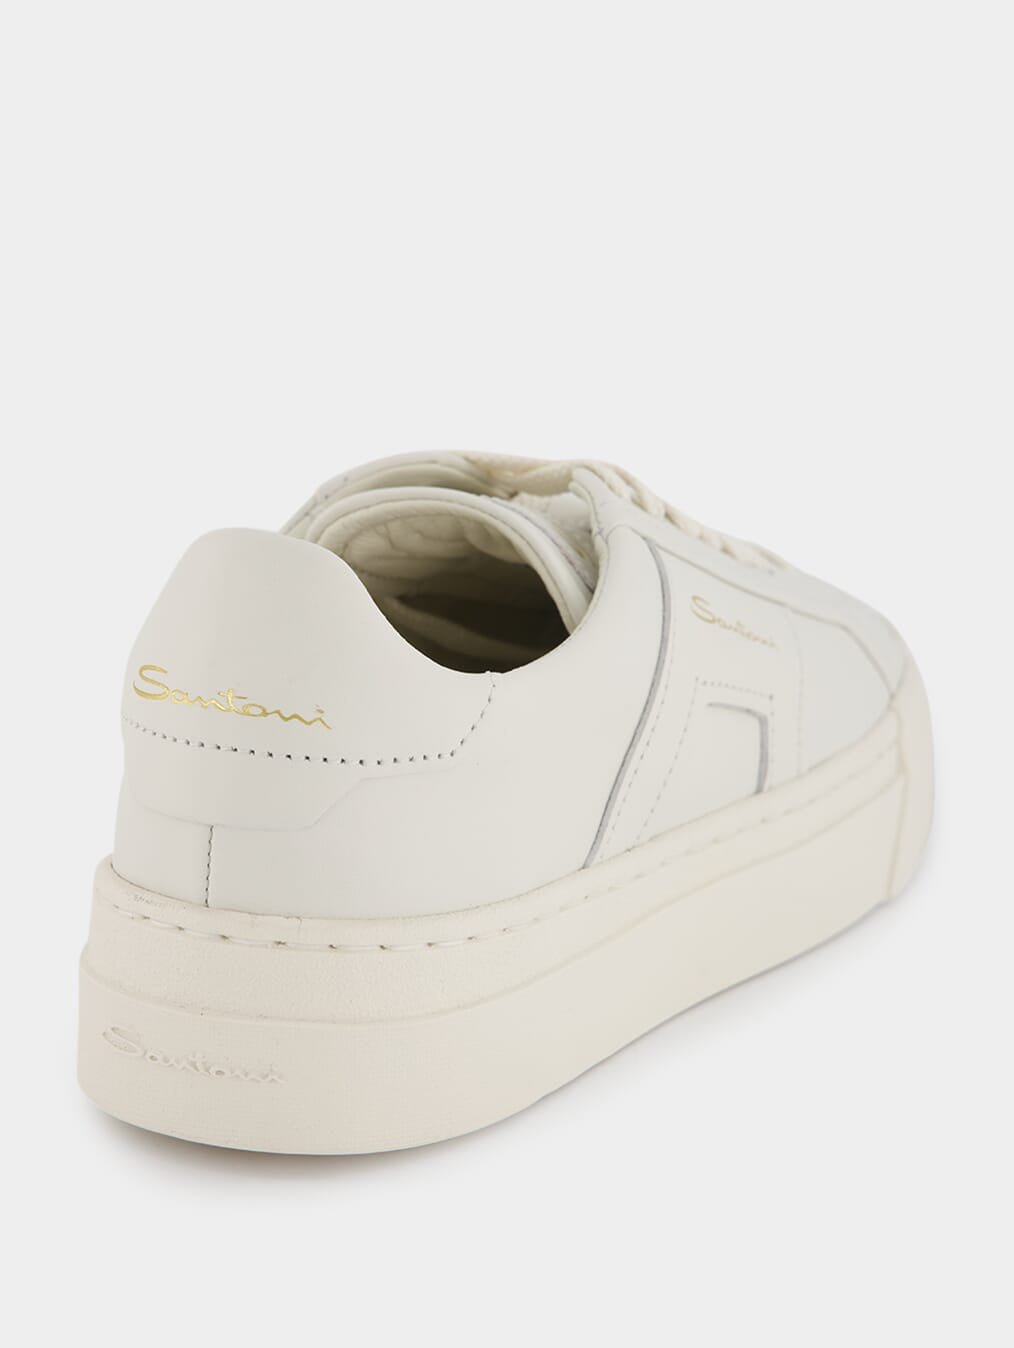 SantoniDouble Buckle Leather Sneakers at Fashion Clinic